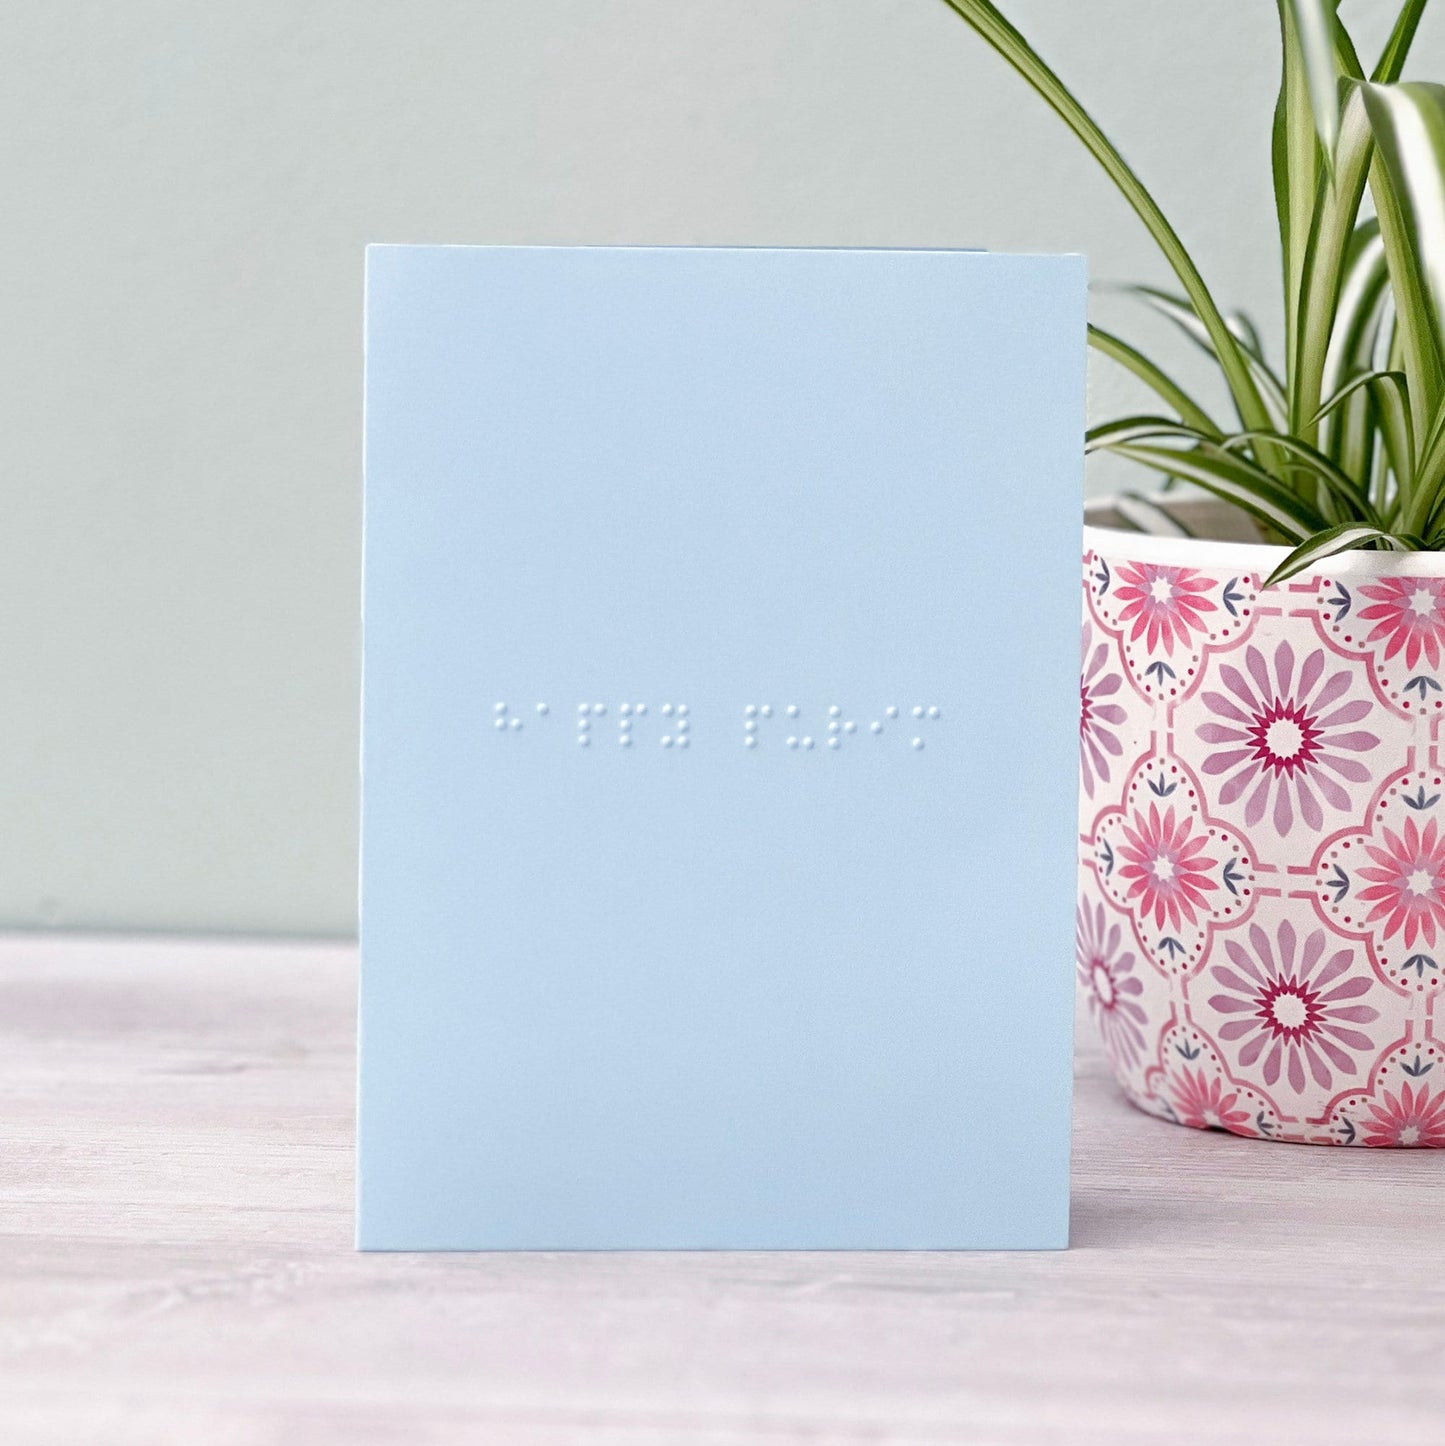 A pastel blue greetings card with happy purim written in grade 1 braille. There is a plant to the right of the photo.